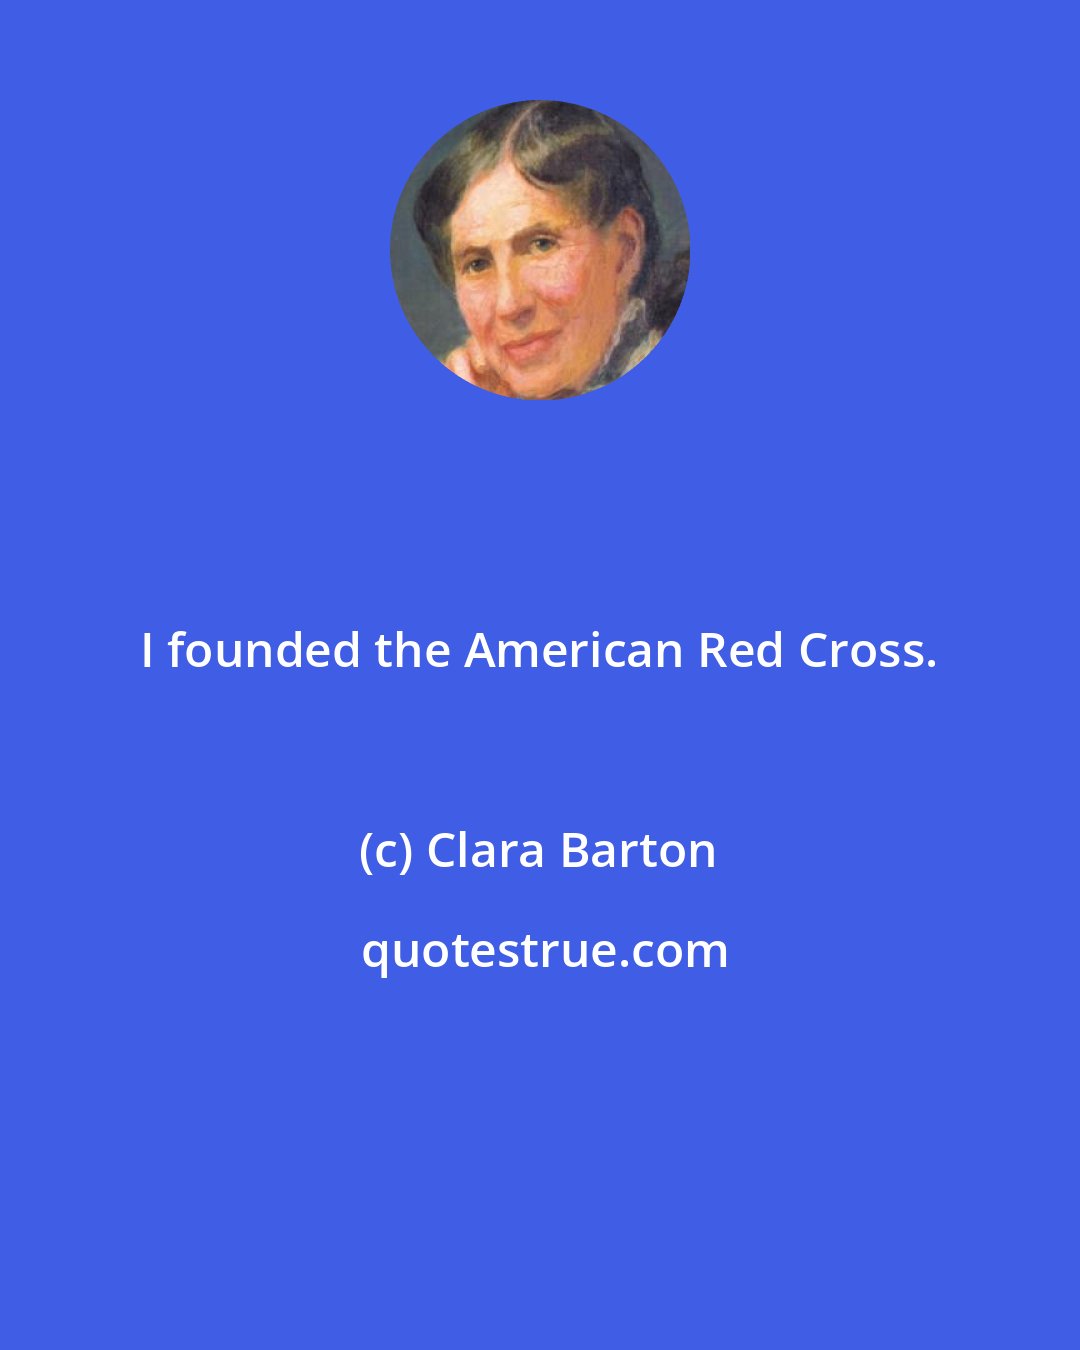 Clara Barton: I founded the American Red Cross.